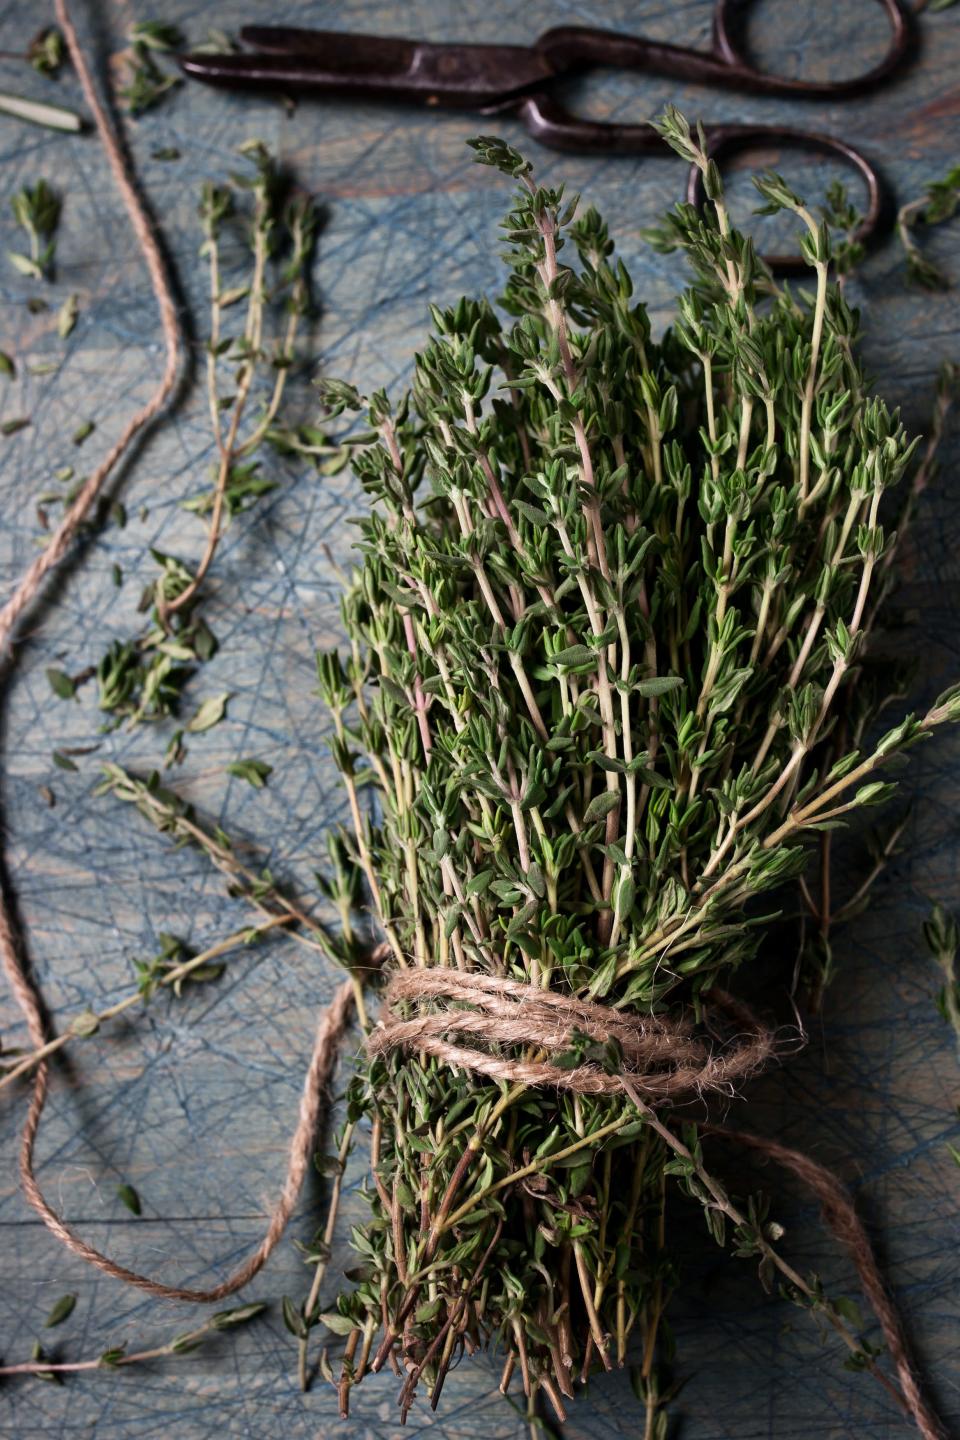 <p>The good news about herbs is that they don't need to be grown in the garden. From festive thyme to aromatic sage, you can grow almost anything in pots, containers and window boxes from your own <a href="https://www.countryliving.com/uk/homes-interiors/interiors/a38143761/kitchen-larder-ideas/" rel="nofollow noopener" target="_blank" data-ylk="slk:kitchen" class="link rapid-noclick-resp">kitchen</a>. </p><p>"Tender herbs, like basil, are likely to only come dried or frozen by the time Christmas rolls around," says Chris Bonnett from <a href="https://www.gardeningexpress.co.uk/" rel="nofollow noopener" target="_blank" data-ylk="slk:Gardening Express" class="link rapid-noclick-resp">Gardening Express</a>. "However, Christmas dinner always tastes best fresh. Festive classics like thyme and rosemary are very hardy and can withstand <a href="https://www.countryliving.com/uk/wildlife/countryside/a38407925/white-christmas-weather-forecast/" rel="nofollow noopener" target="_blank" data-ylk="slk:snowy" class="link rapid-noclick-resp">snowy</a> weather. <br></p><p>"Others, like oregano, can be grown inside during chillier months. All they usually need is a well-draining soil, container, and a sunny windowsill."</p><p>Take a look at the herbs you can easily grow over the holidays...</p>